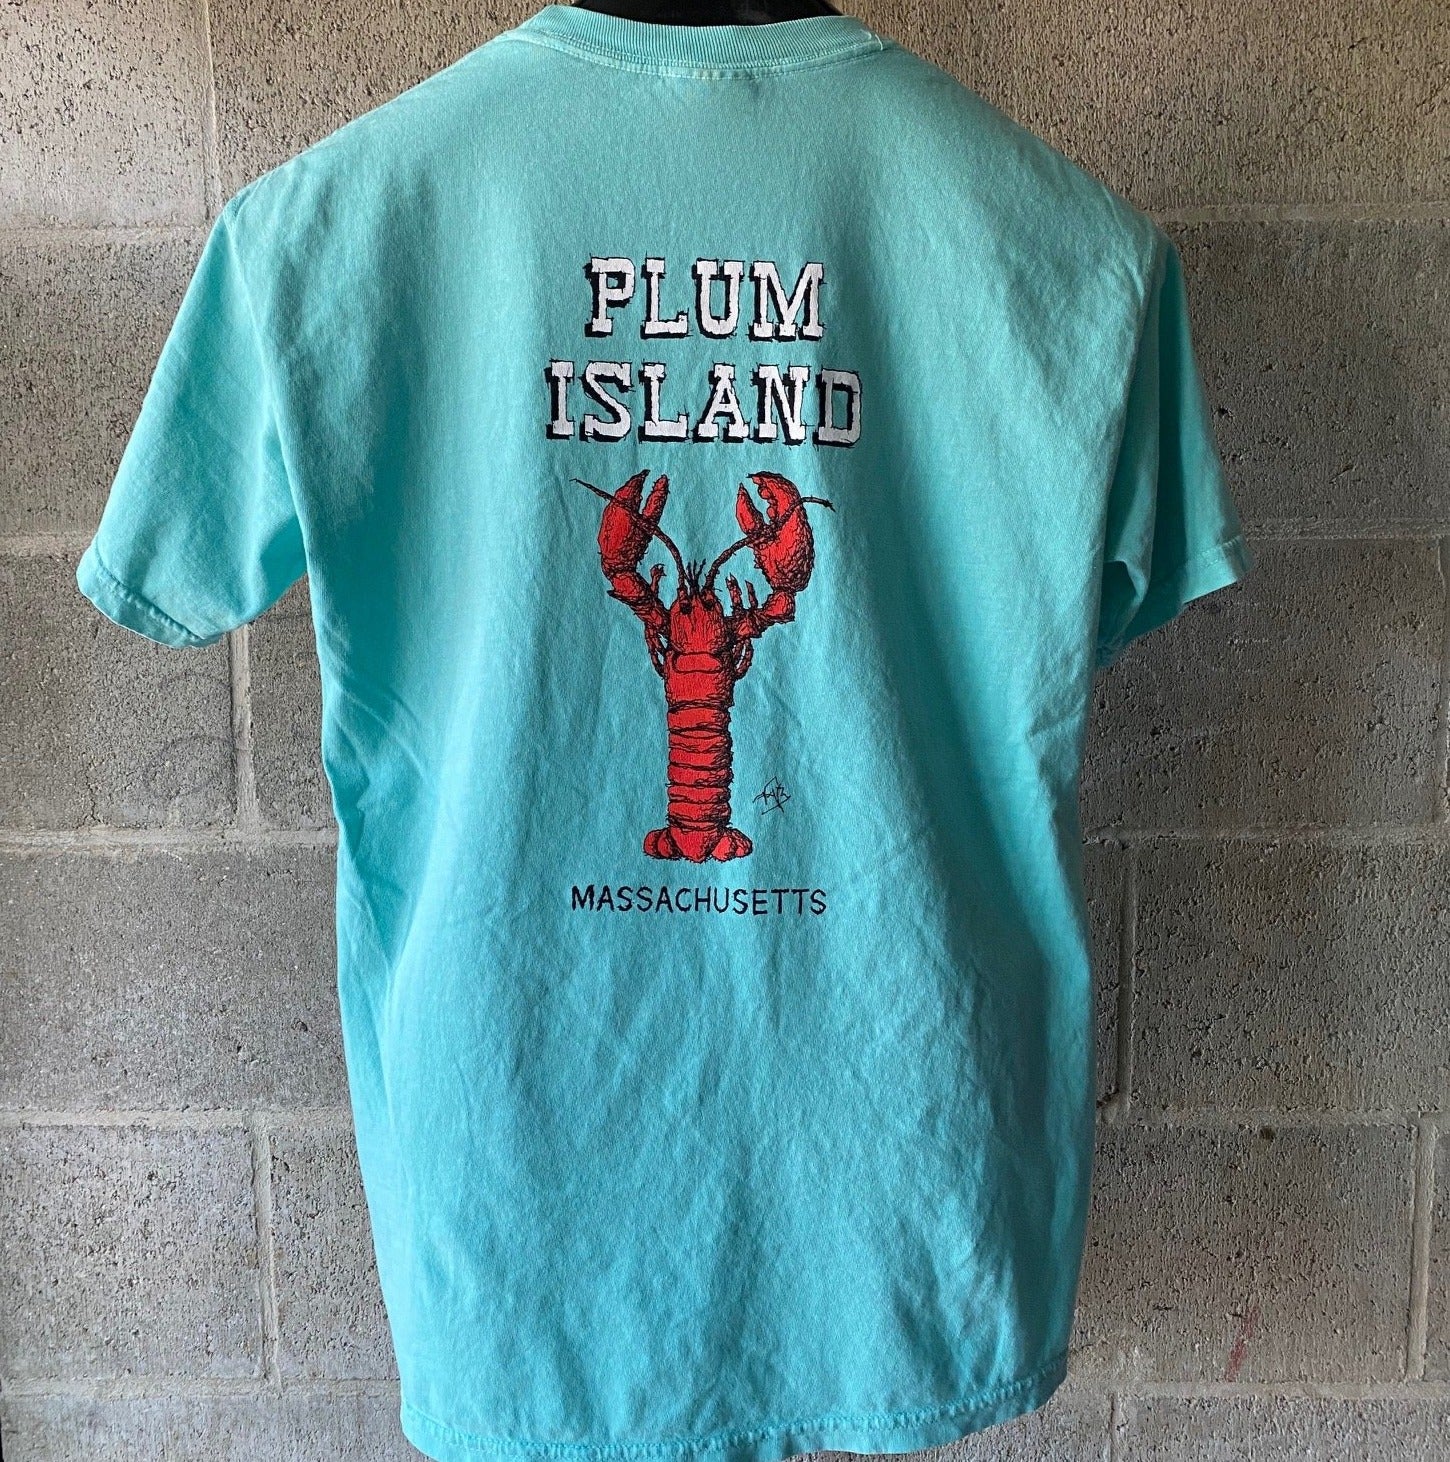 Surfland Gear - Nate's Lobster S/S Tee